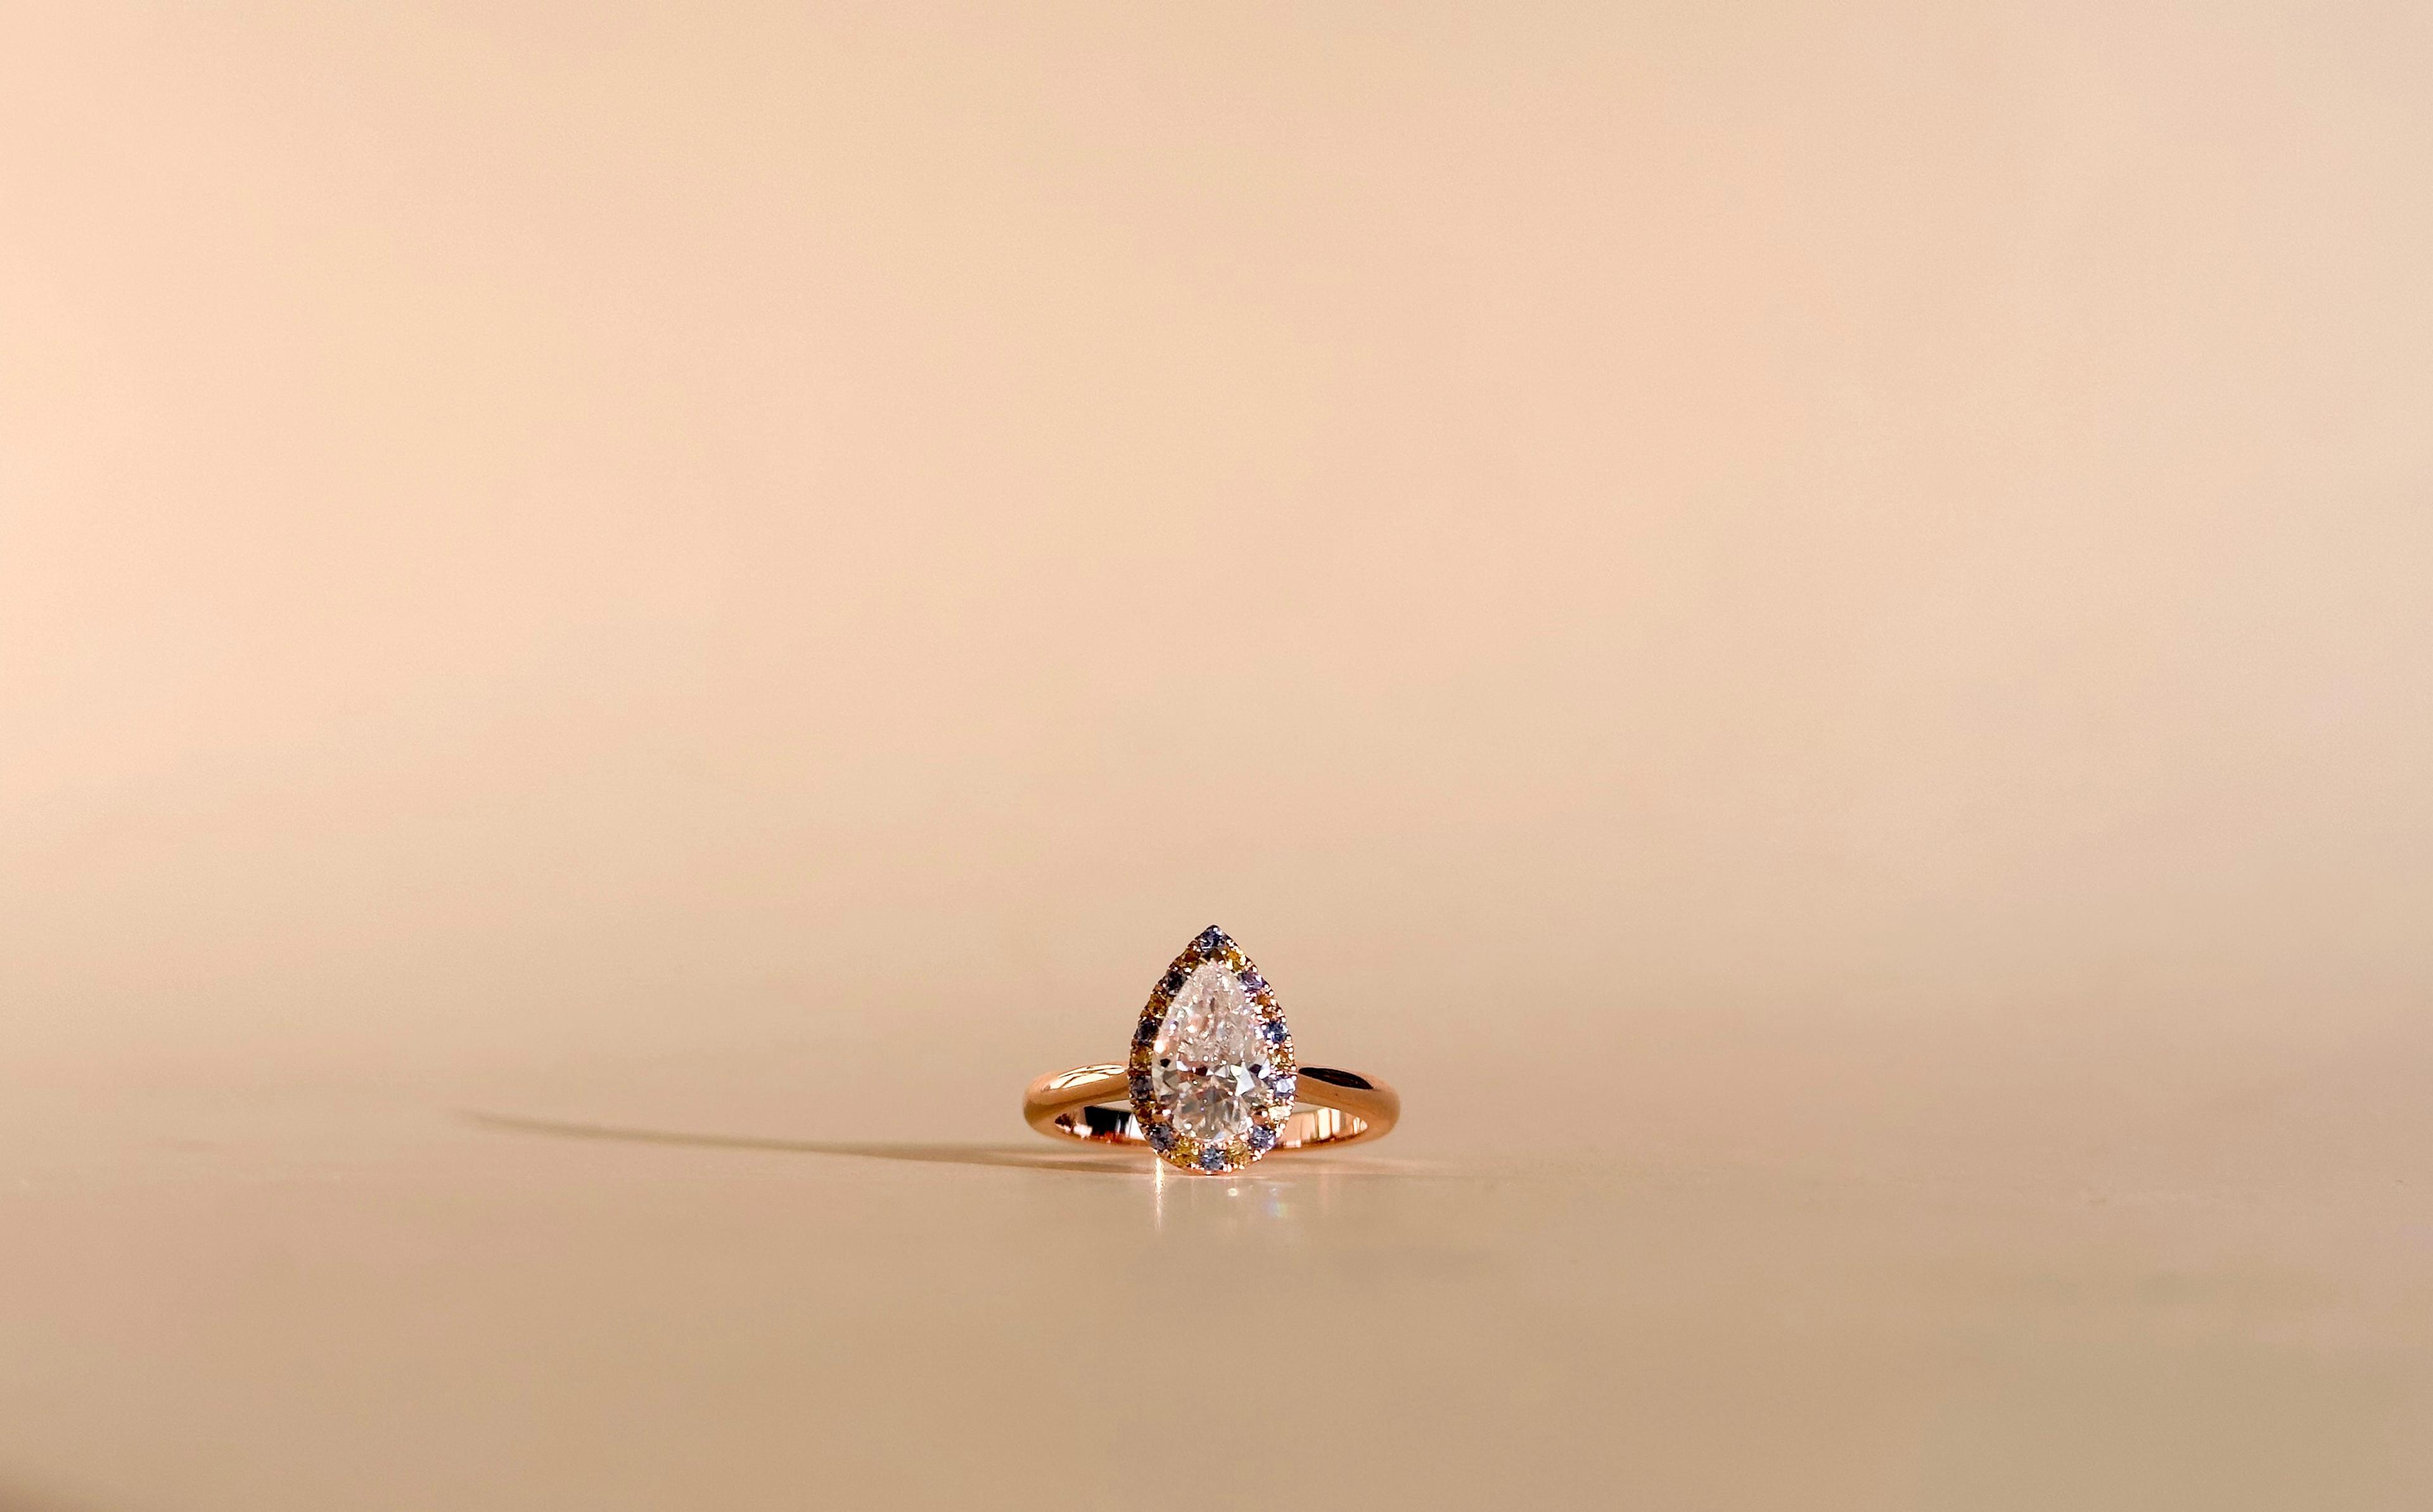 1.5 Carat Pear Cut Diamond Solitaire With A Colourful Gemstone Halo in 14K Rose Gold